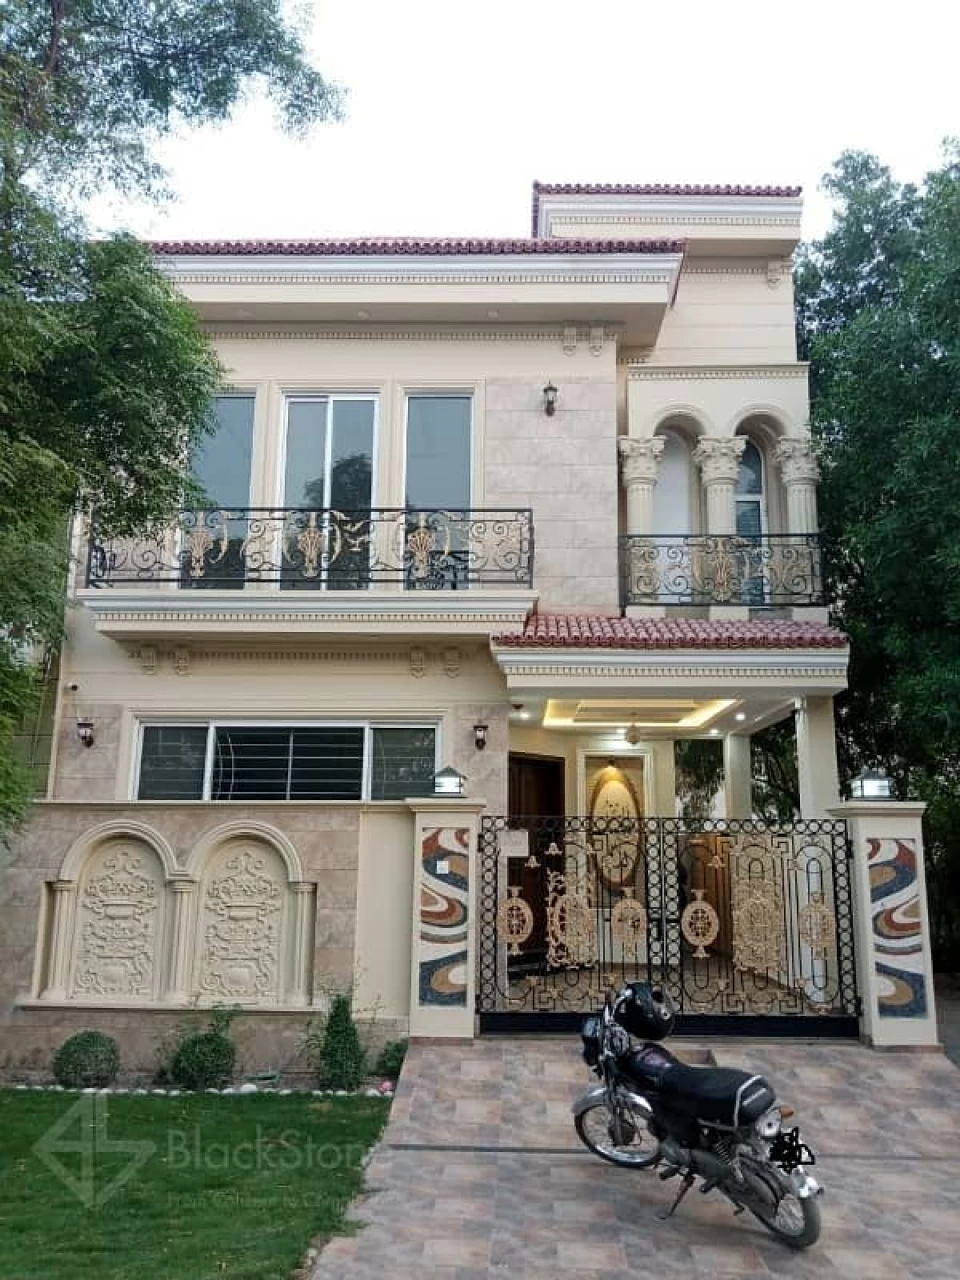 House For Sale in Lahore , House For Sale in DHA , House For Sale in DHA Lahore , House For Sale in DHA , 5 Marla House For Sale In DHA Phase 5 , DHA, Lahore Pakistan,3 Bedrooms Bedrooms, 3 Rooms Rooms, 4 BathroomsBathrooms, House,For Sale,2599